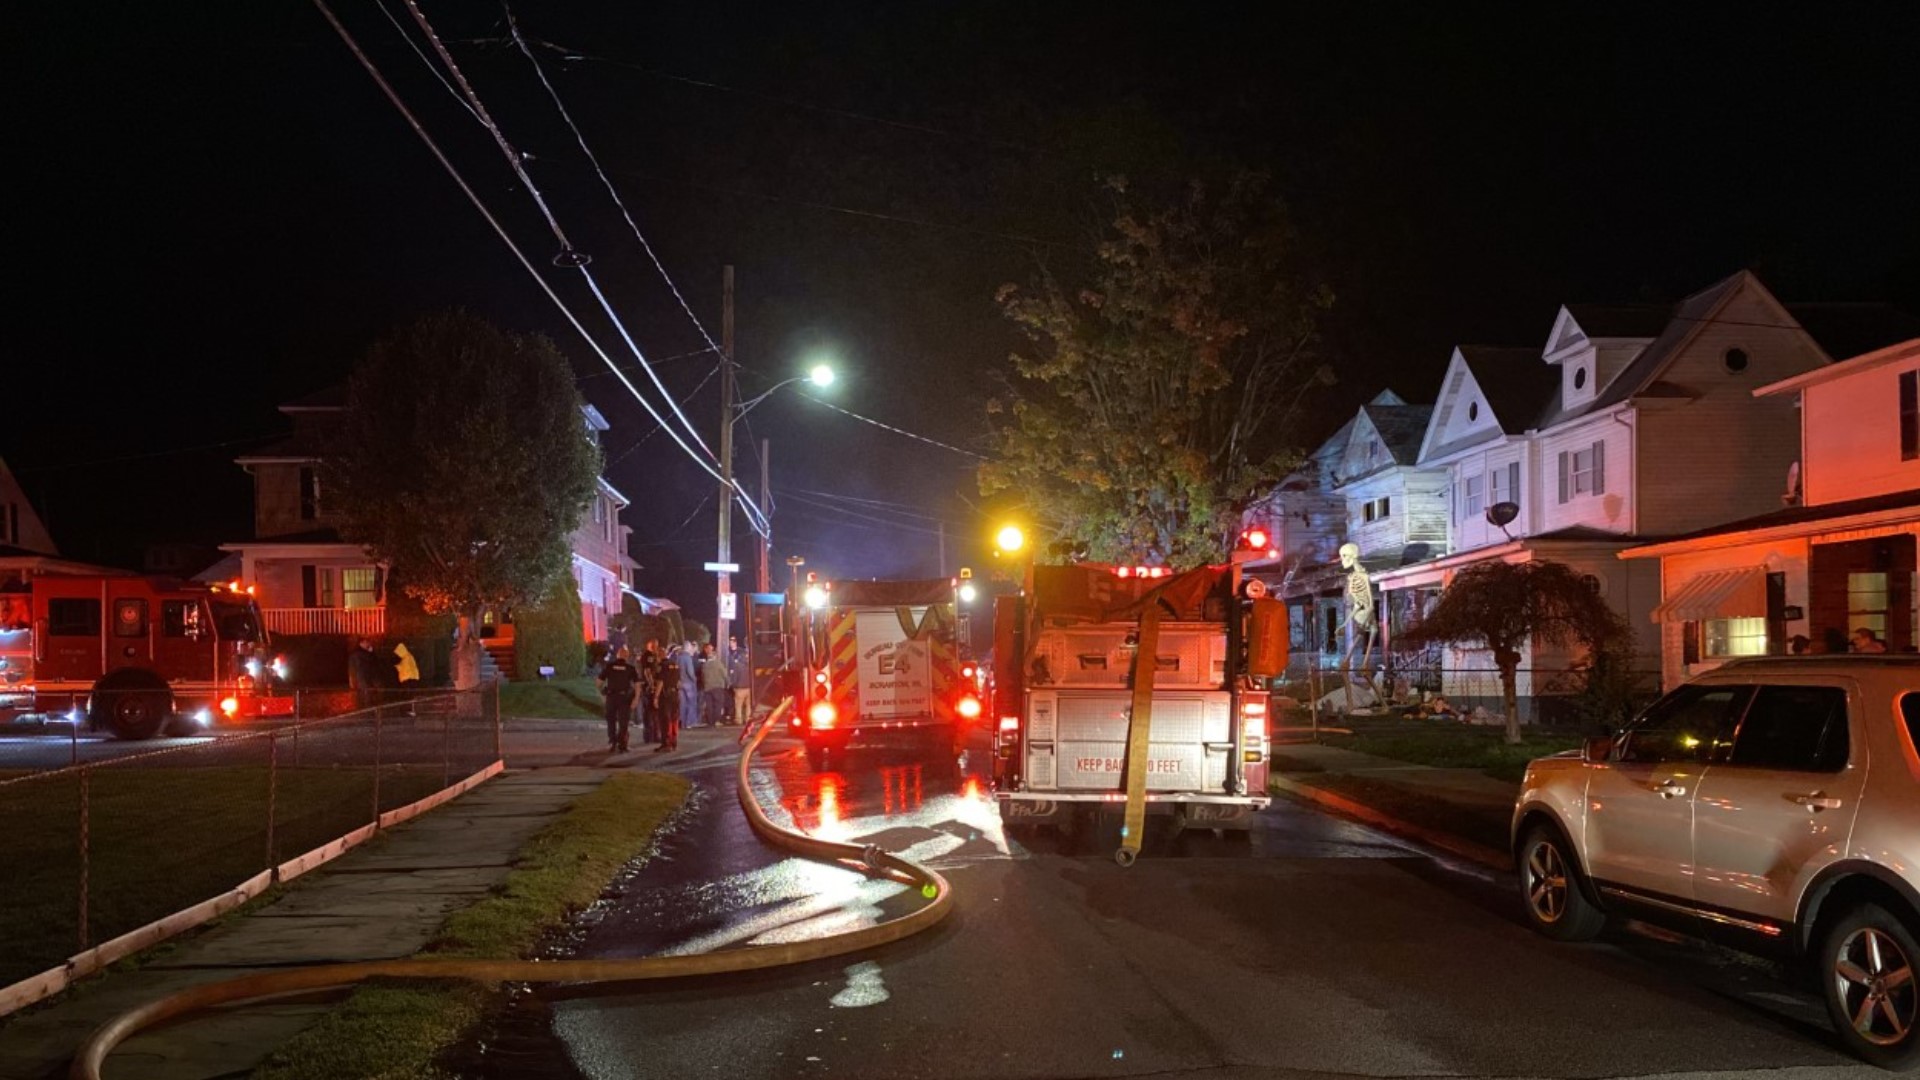 A man is dead after a fire along West Gibson Street in Scranton. A man's body was discovered in the fire. He was later identified as 64-year-old Gerard McGuire.